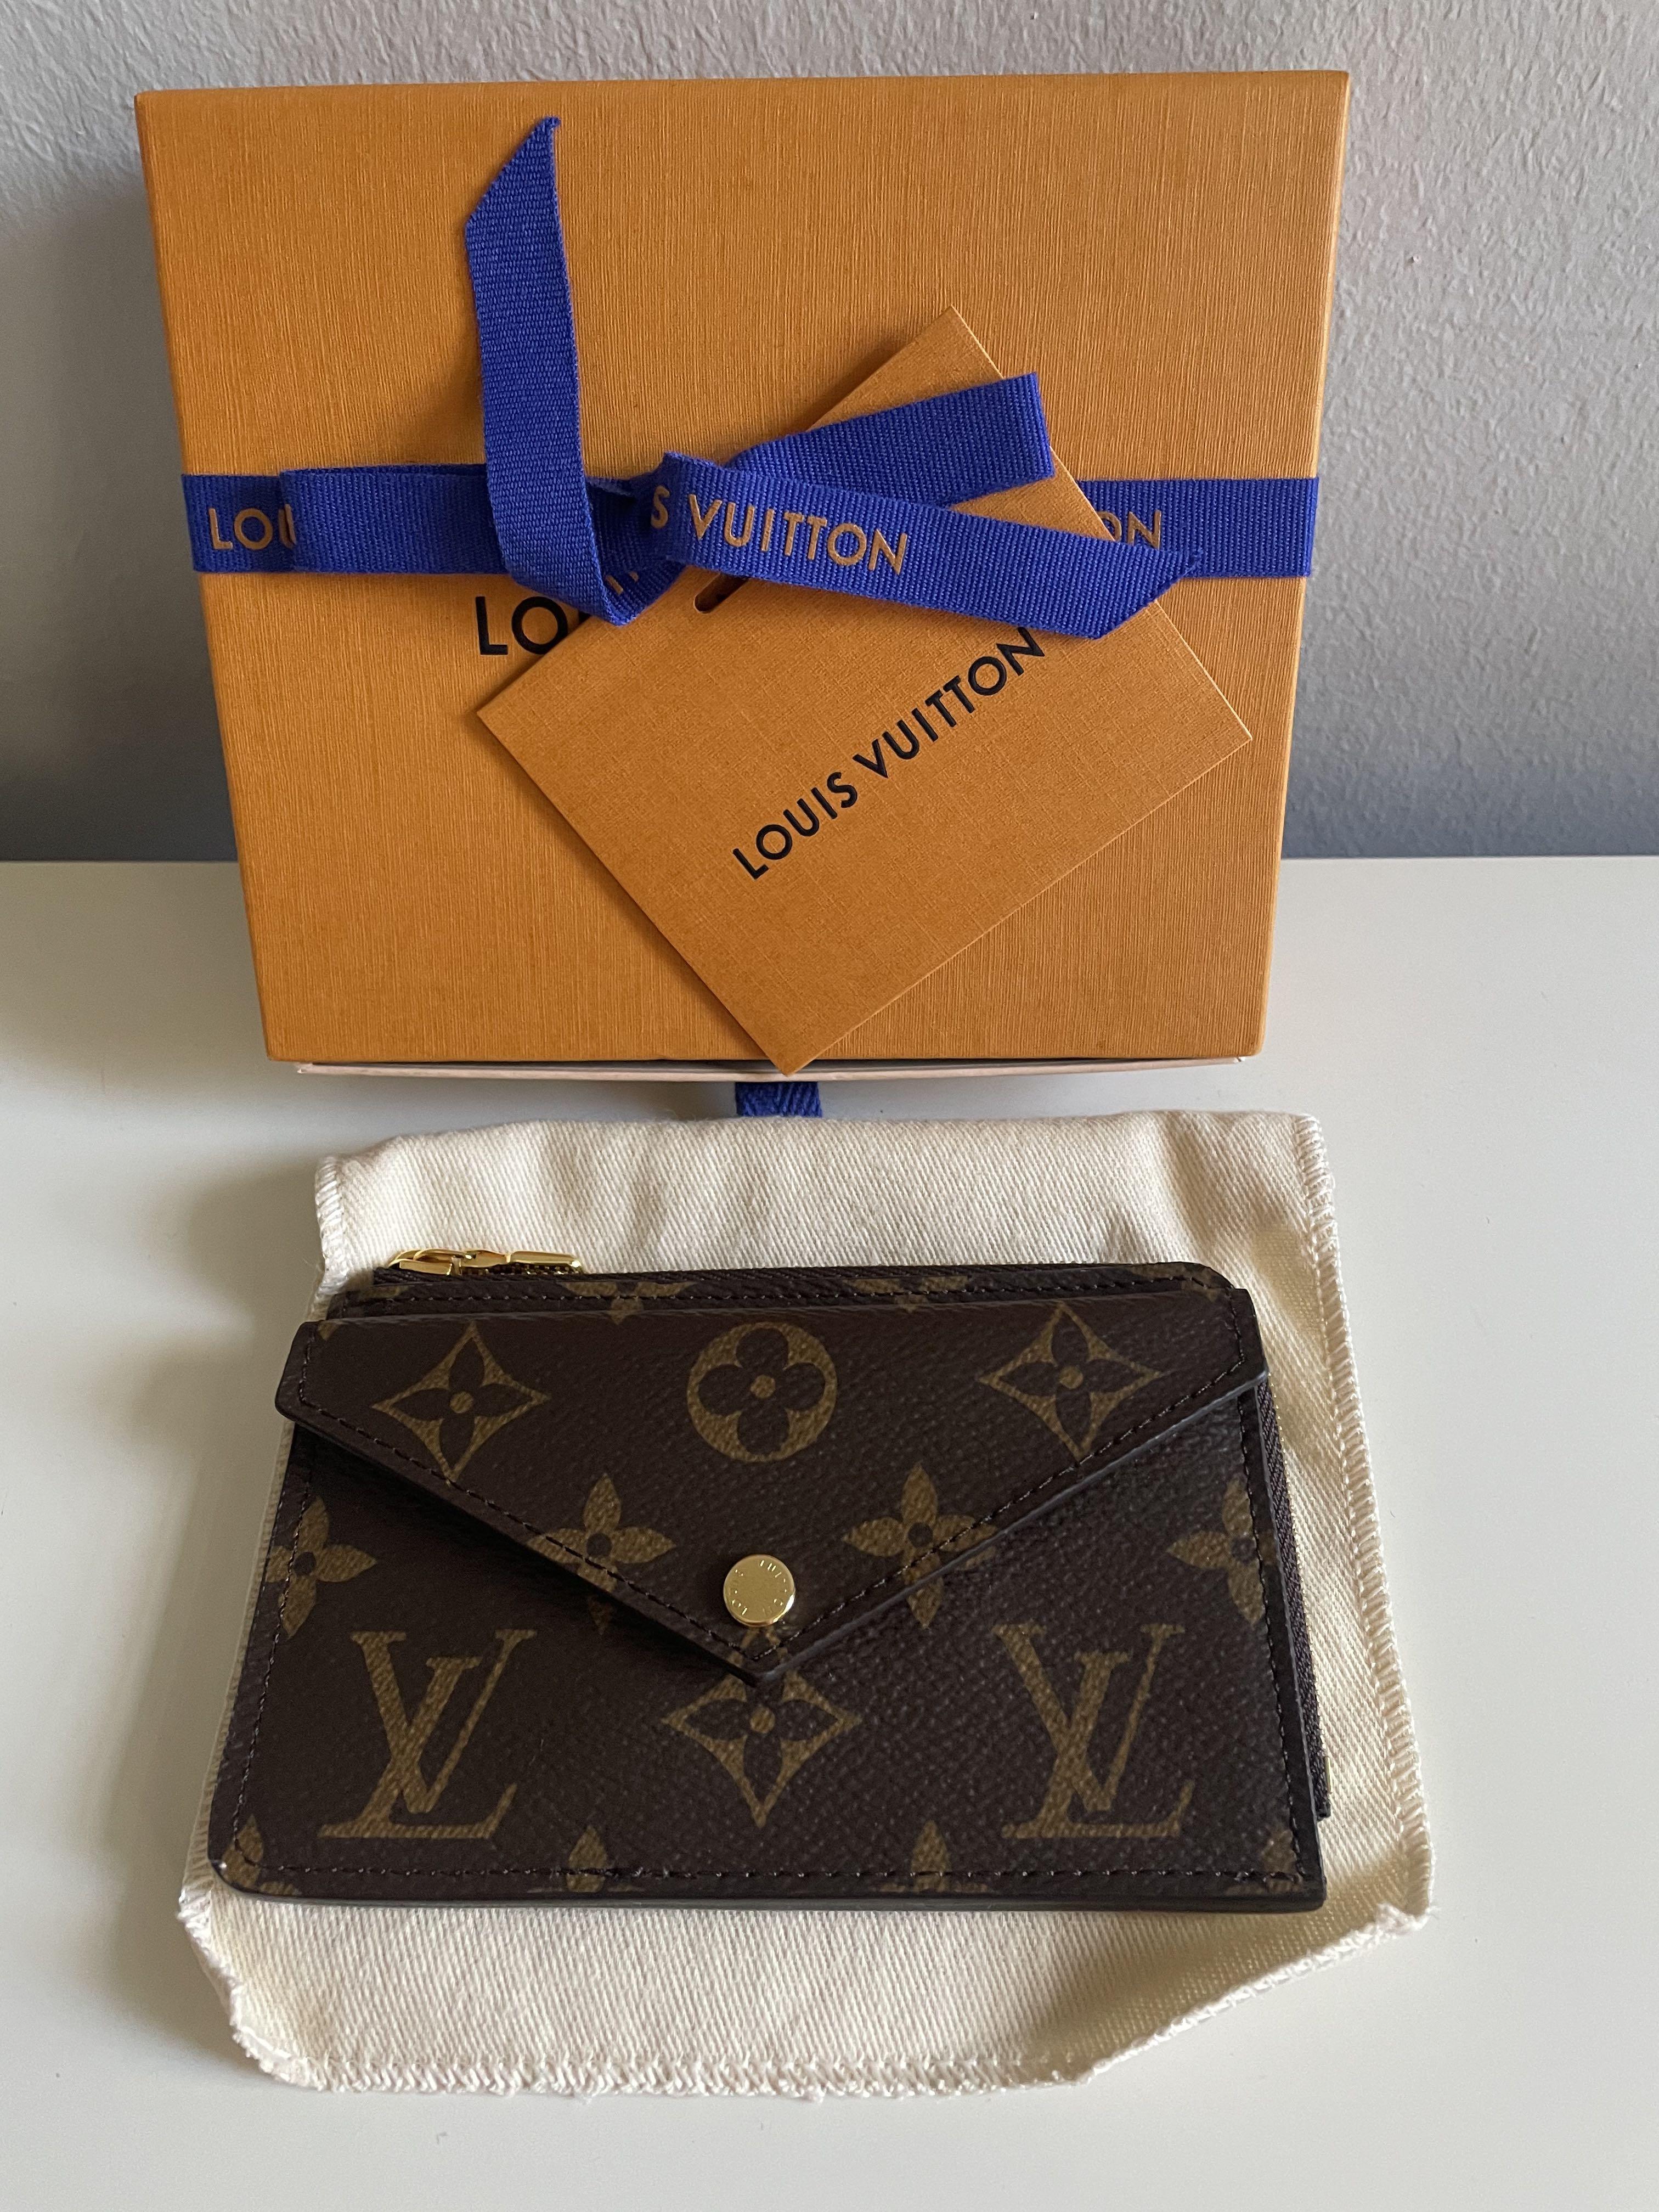 LOUIS VUITTON RECTO VERSO VS. KEY POUCH - WHICH ONE IS BETTER